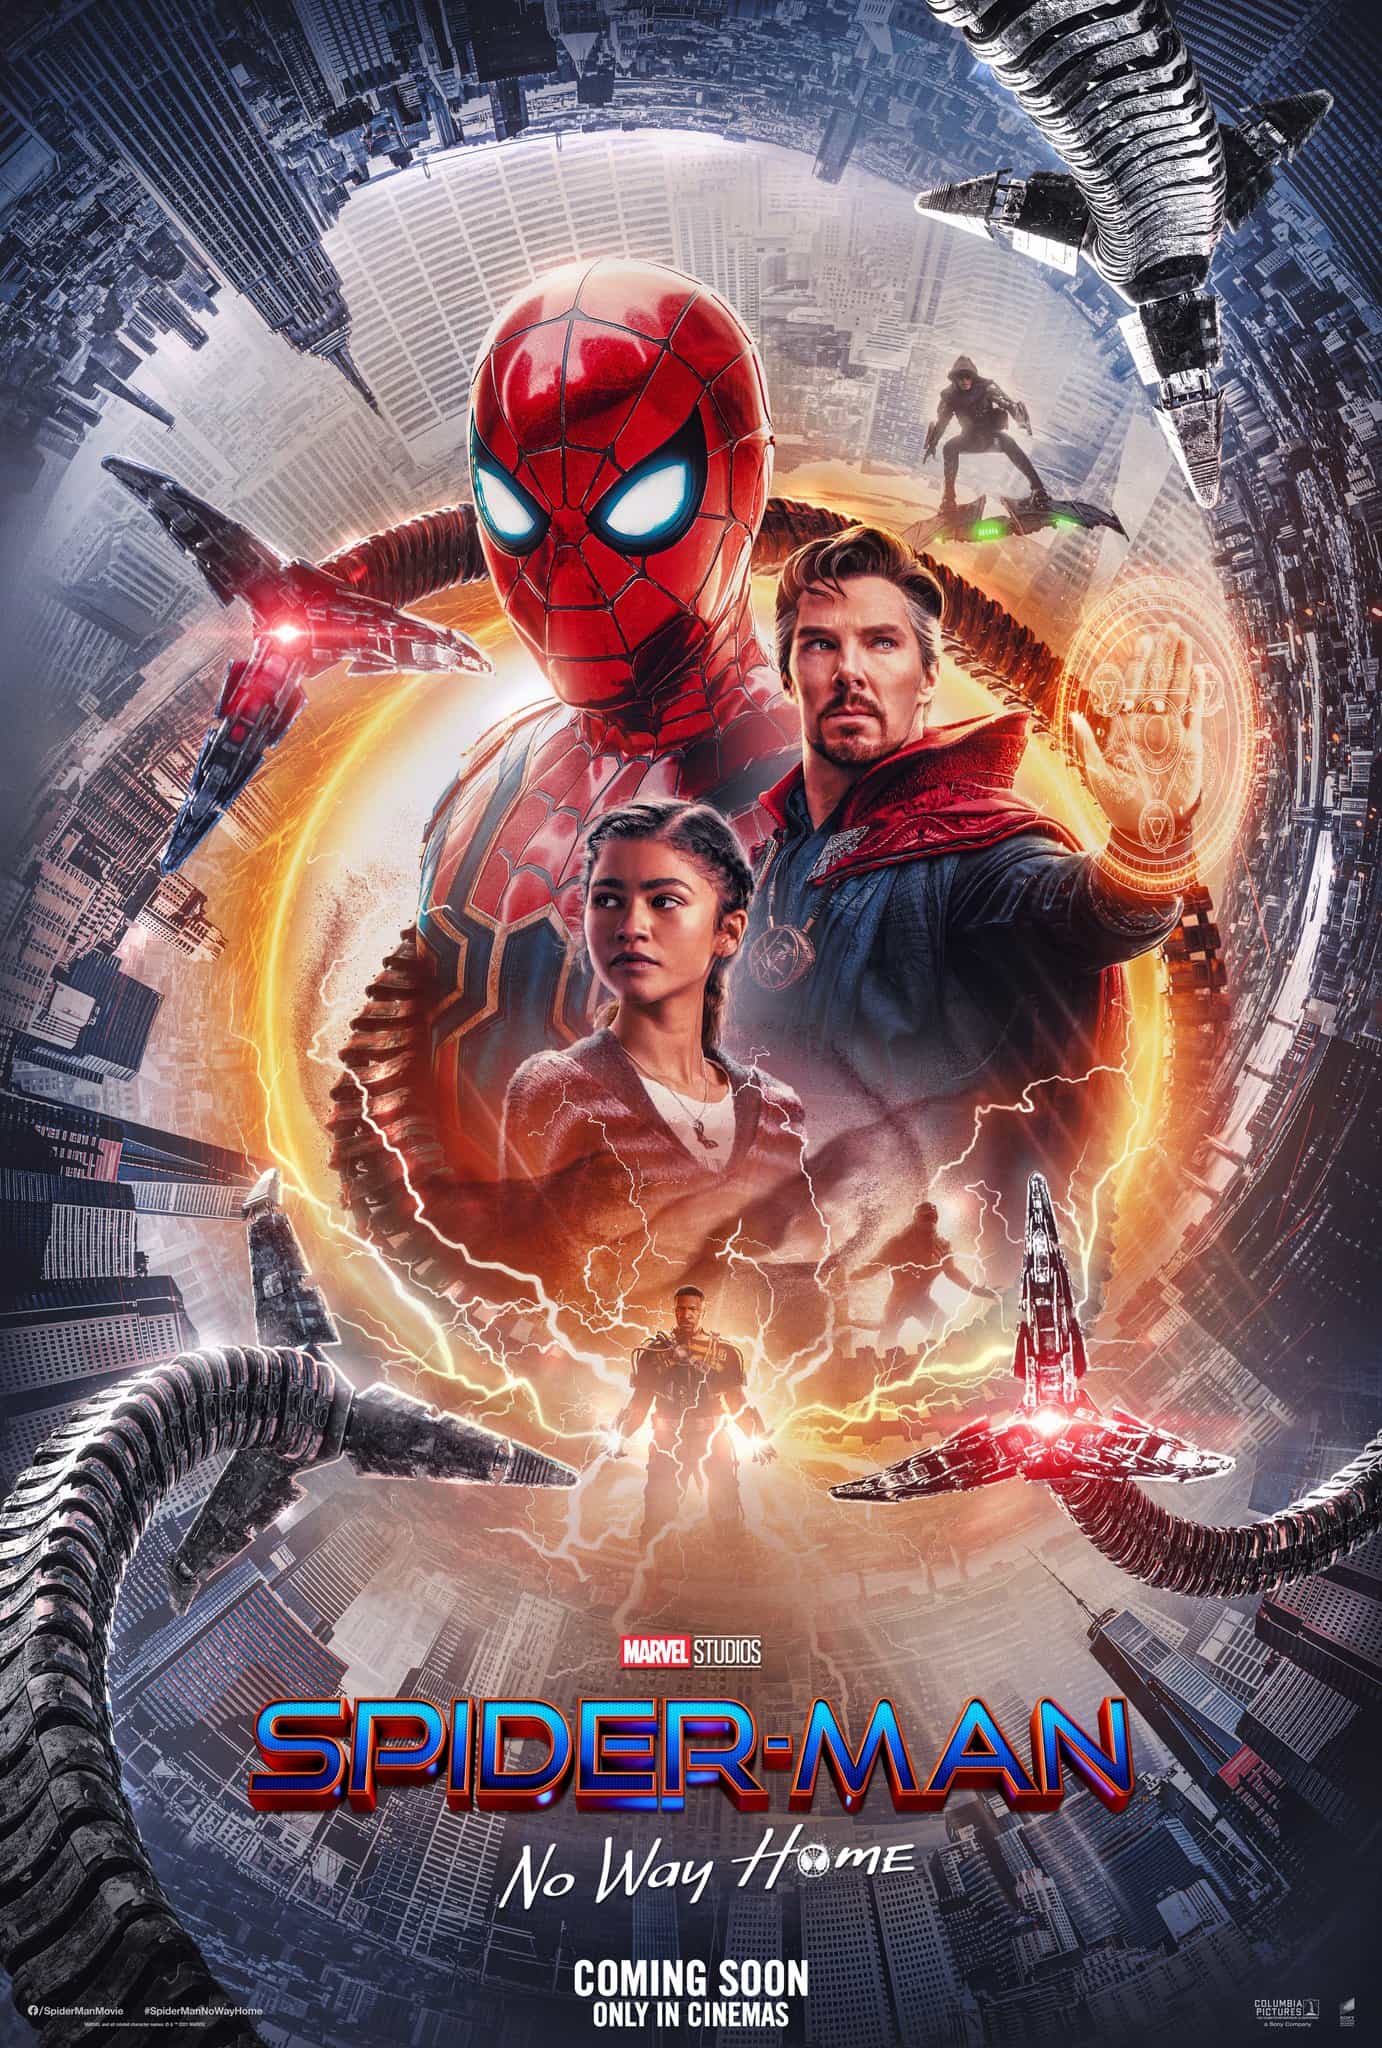 Official UK Home Video Chart 30 March 2022 - 05 April 2022:  No new releases keeps Spider-Man at the top again